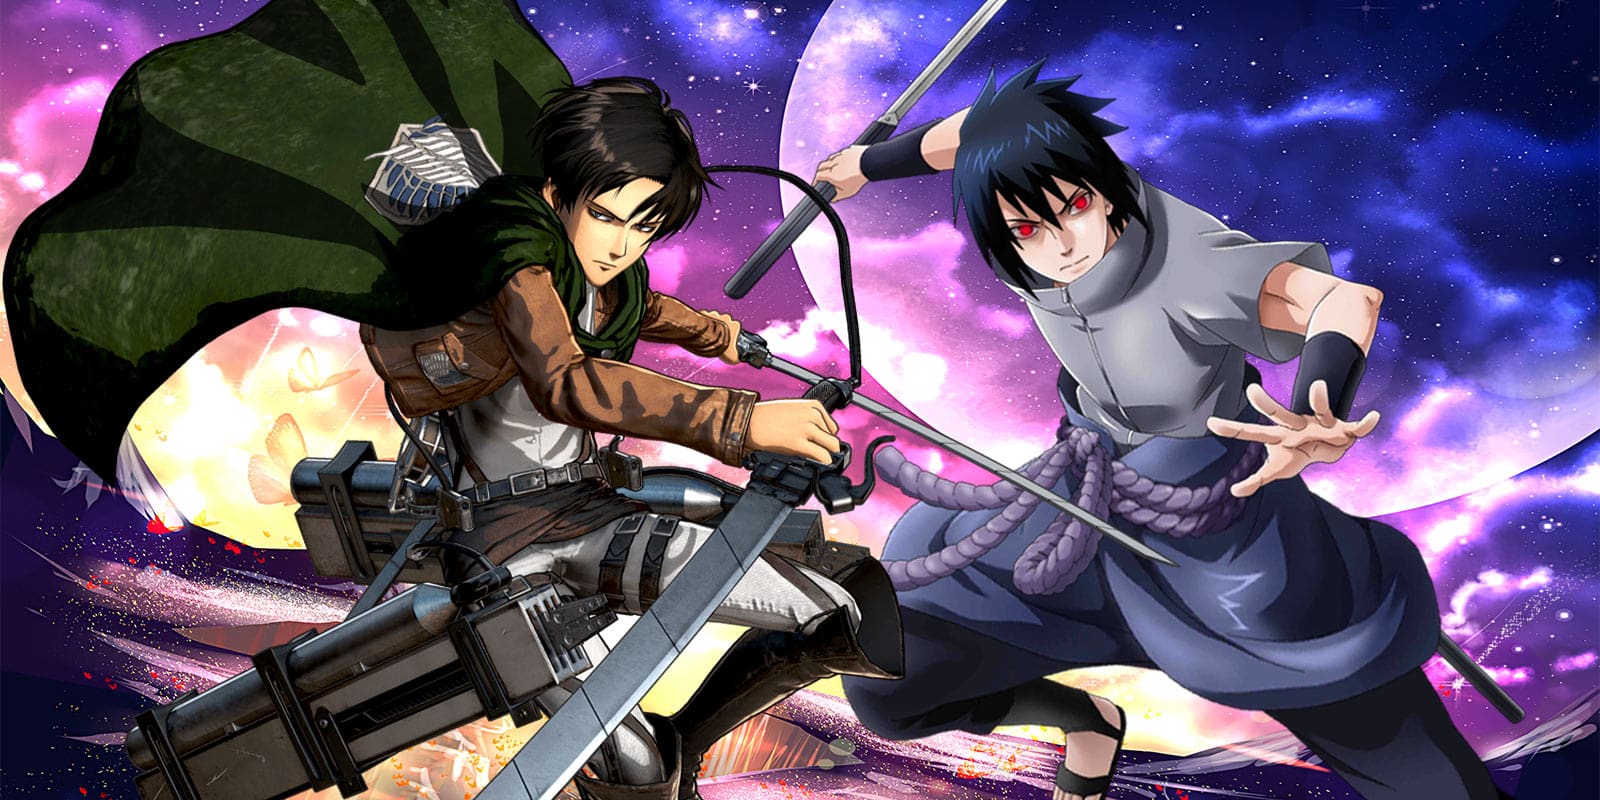 Free Png Download Anime Male With Sword Png Images - Swordsman Anime Male  Warrior - 480x778 PNG Download - PNGkit